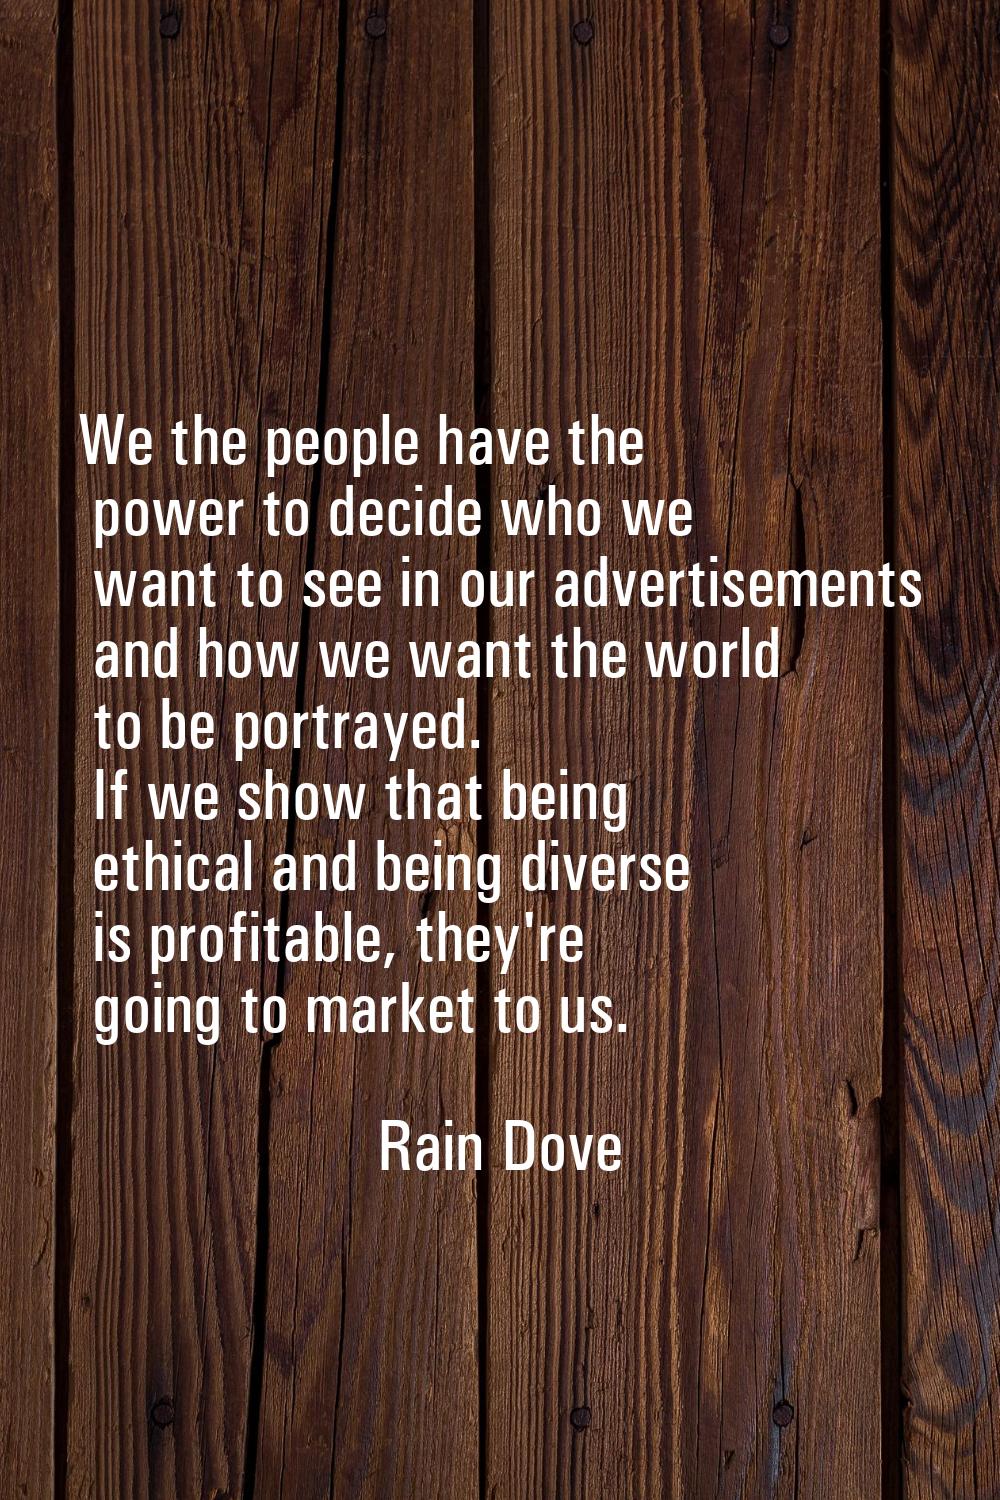 We the people have the power to decide who we want to see in our advertisements and how we want the